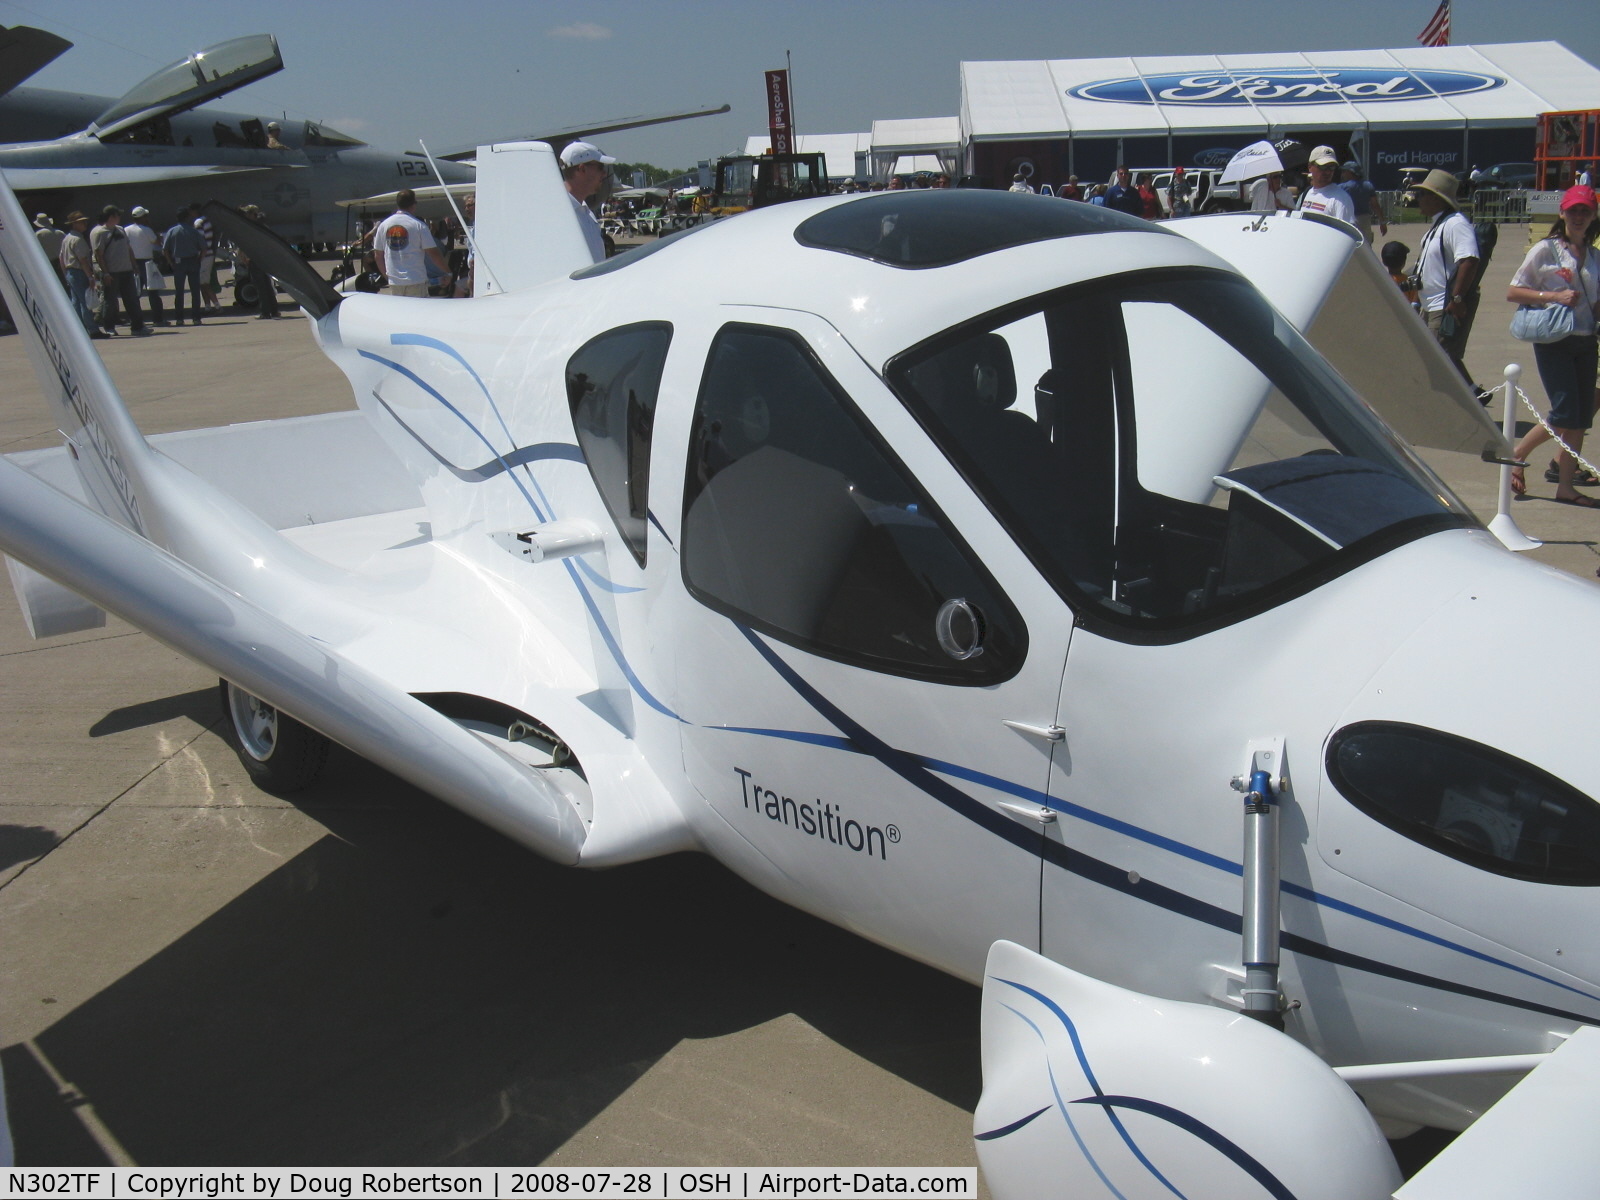 N302TF, 2008 Terrafugia Transition C/N D0001, 2008 Terrafugia TRANSITION canard foldable wing developmental roadable LSA, Rotax 912 S 100 Hp, Two seats side by side to be street-legal capable of highway speeds on the road. First flight expected late 2008. Optional full-vehicle parachute.